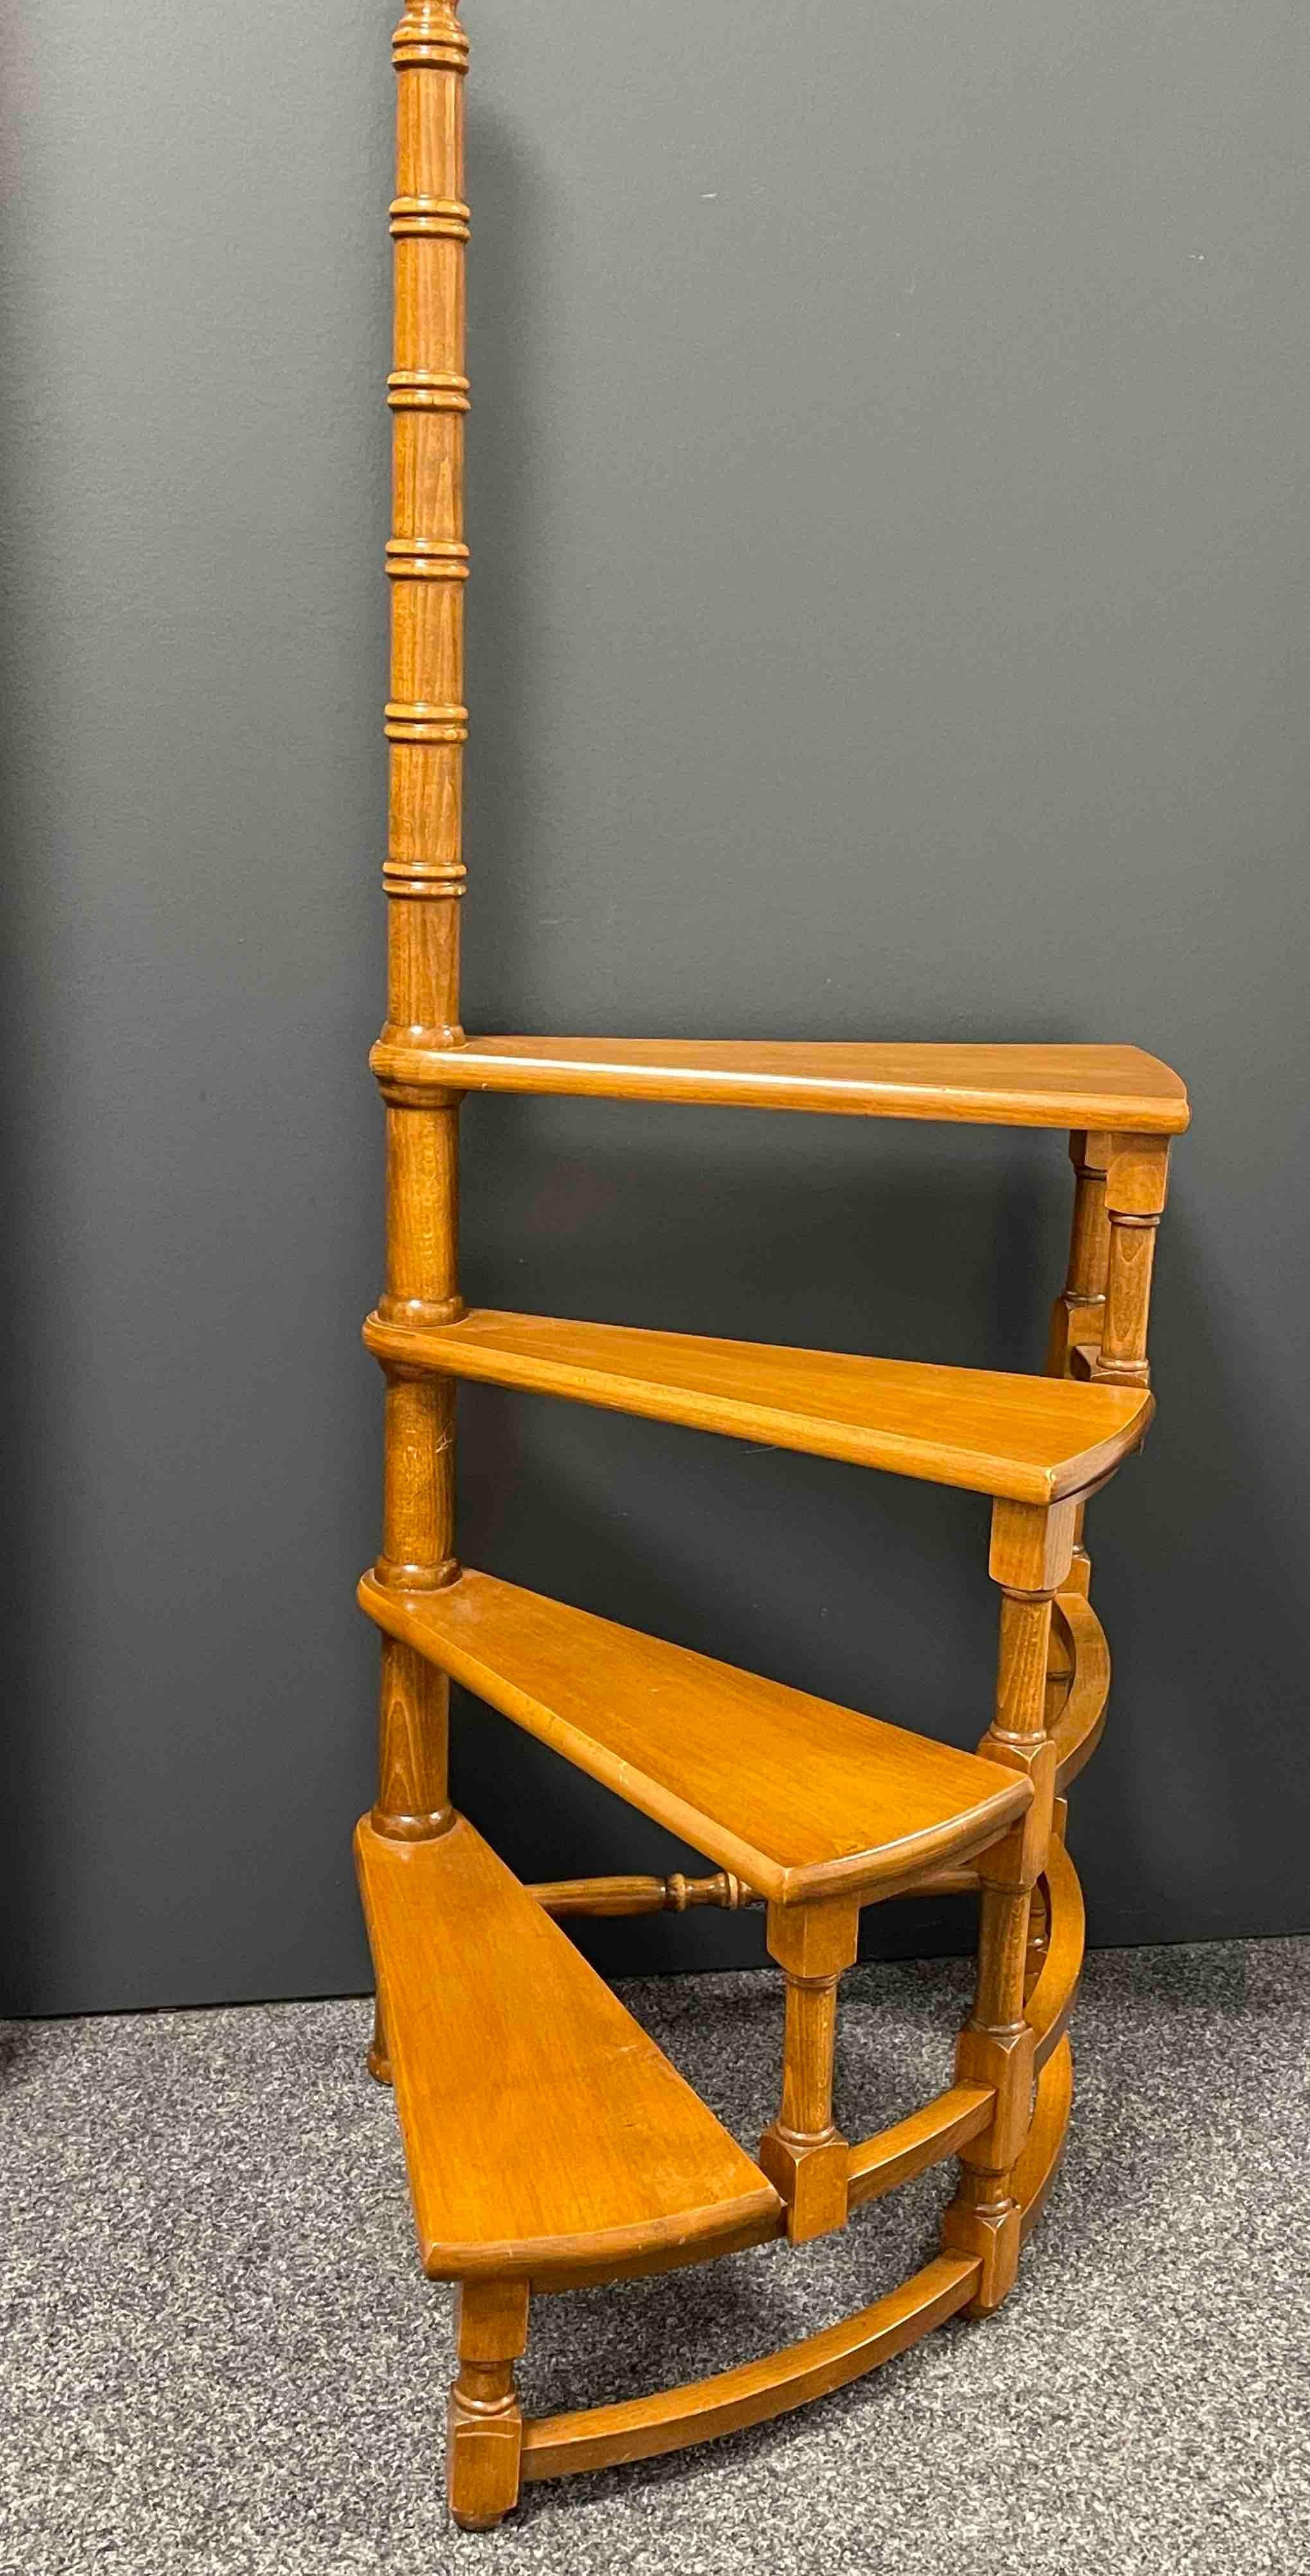 Created in Austria in the 1960s and standing on turned legs, the circular step ladder features four stairs rolled around a turned central post. Versatile and practical, the elegant library essential is in very good used condition with a nice patina.